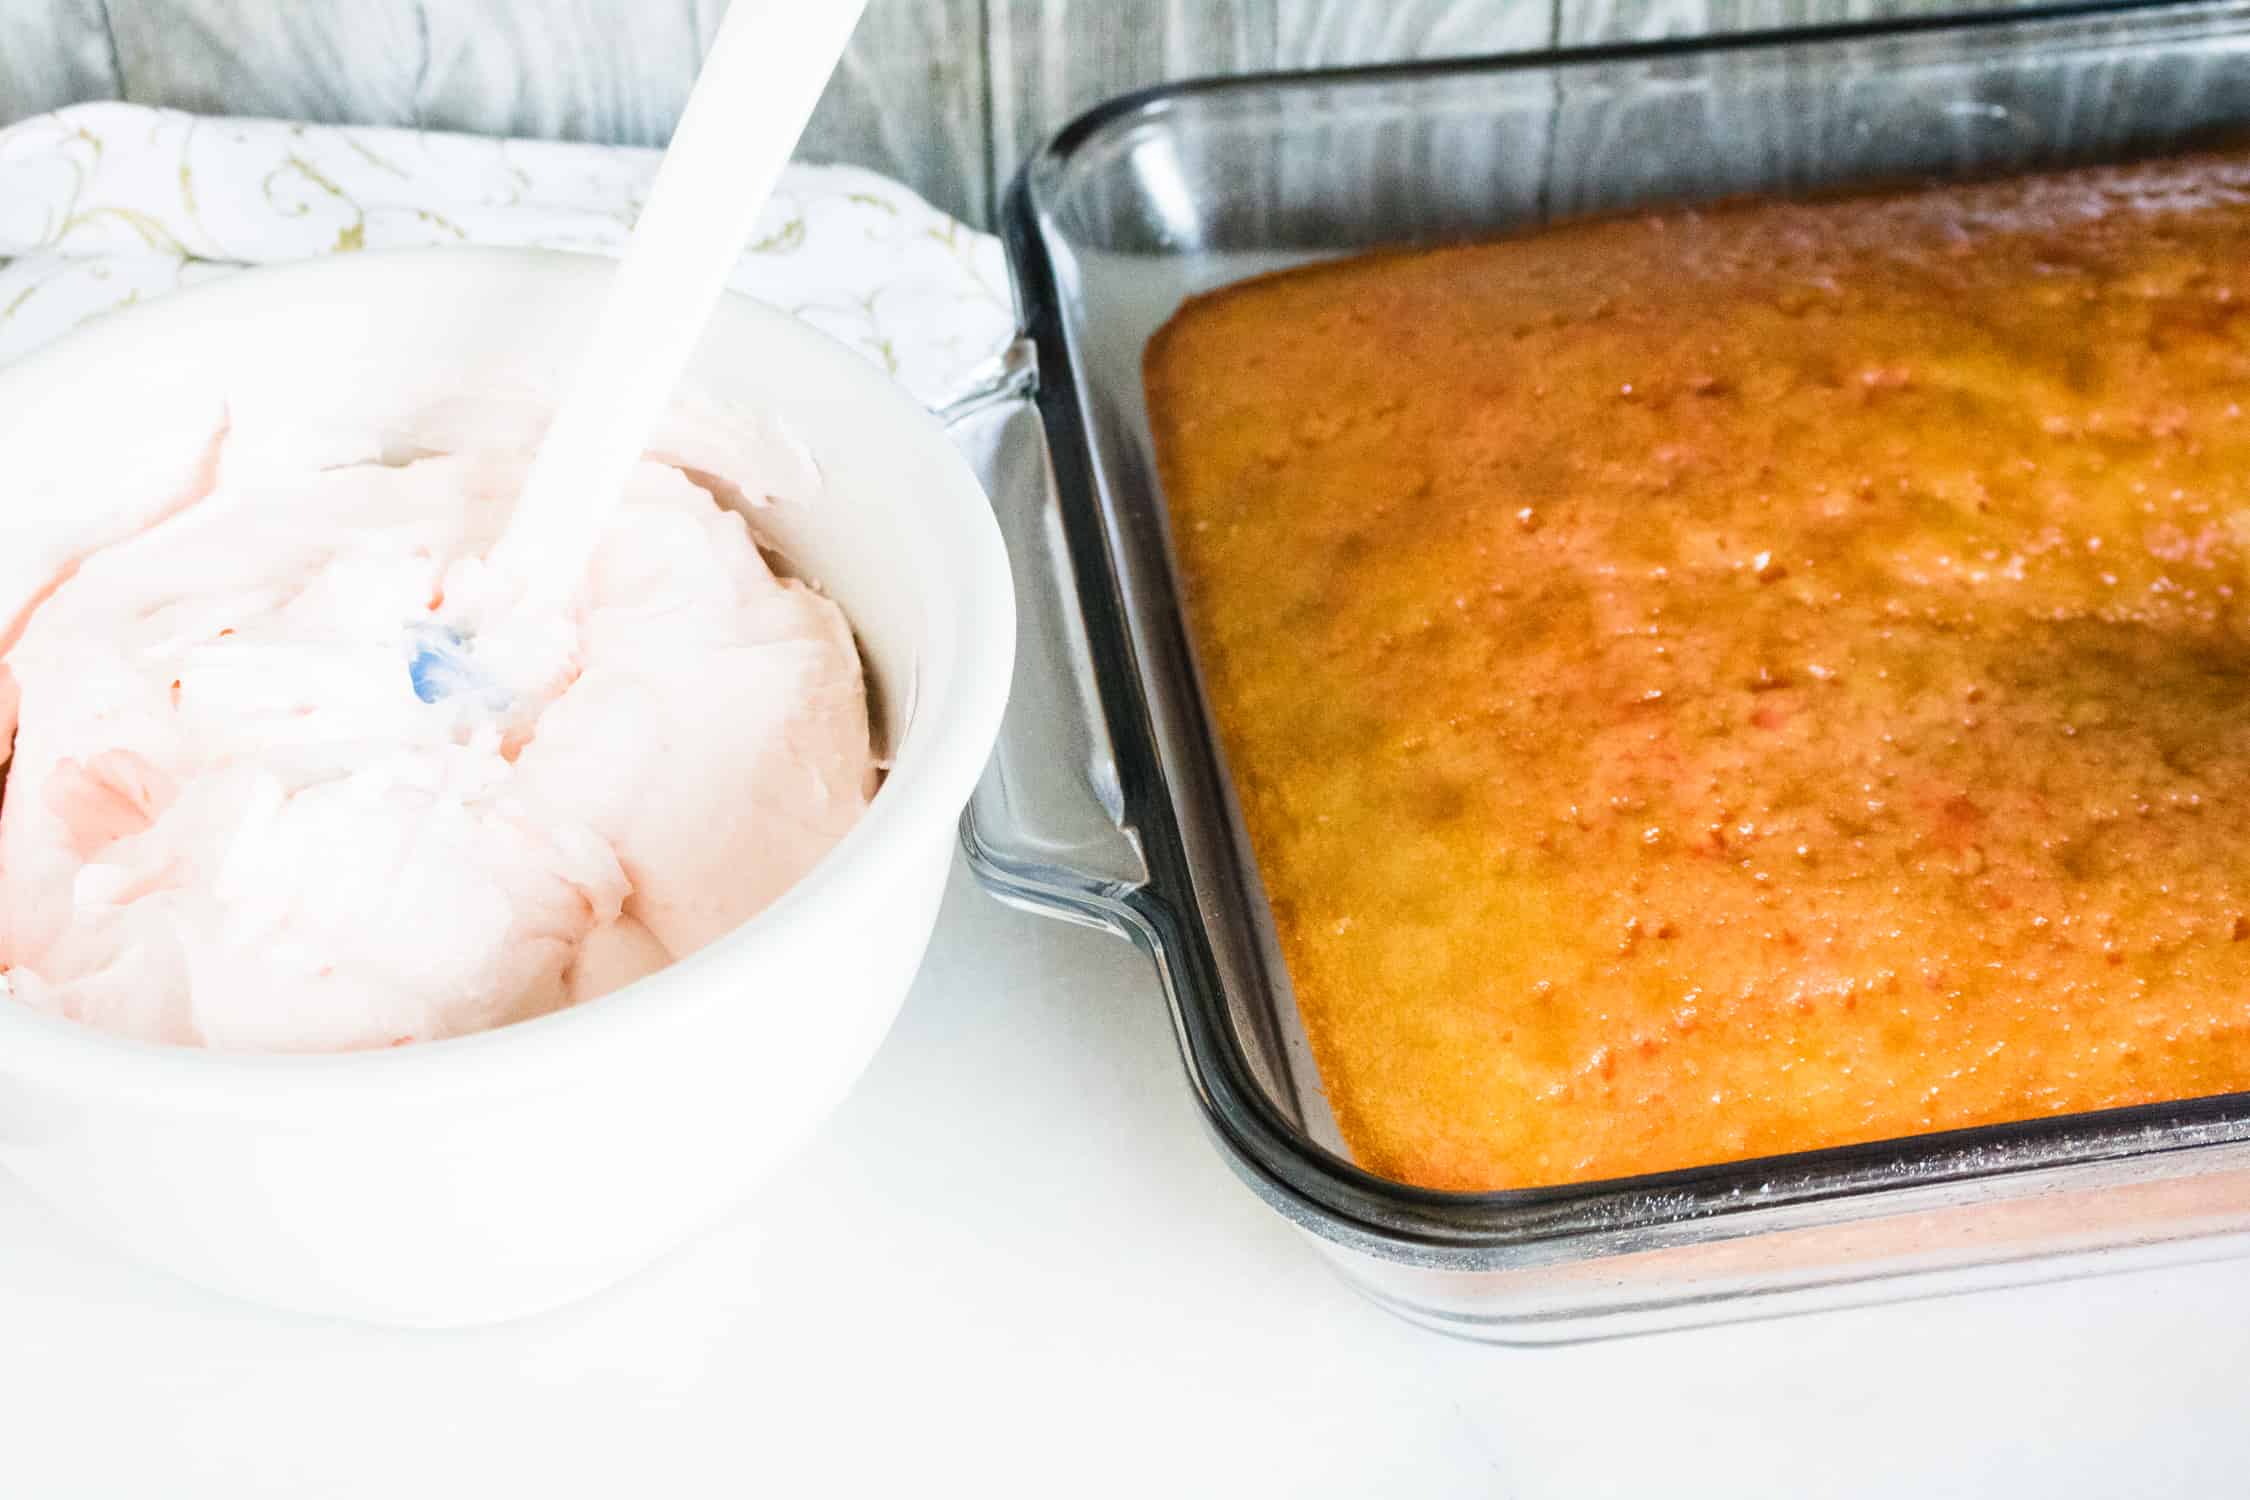 close up view of the poke cake next to a white mixing bowl containing the blended cream cheese mixture